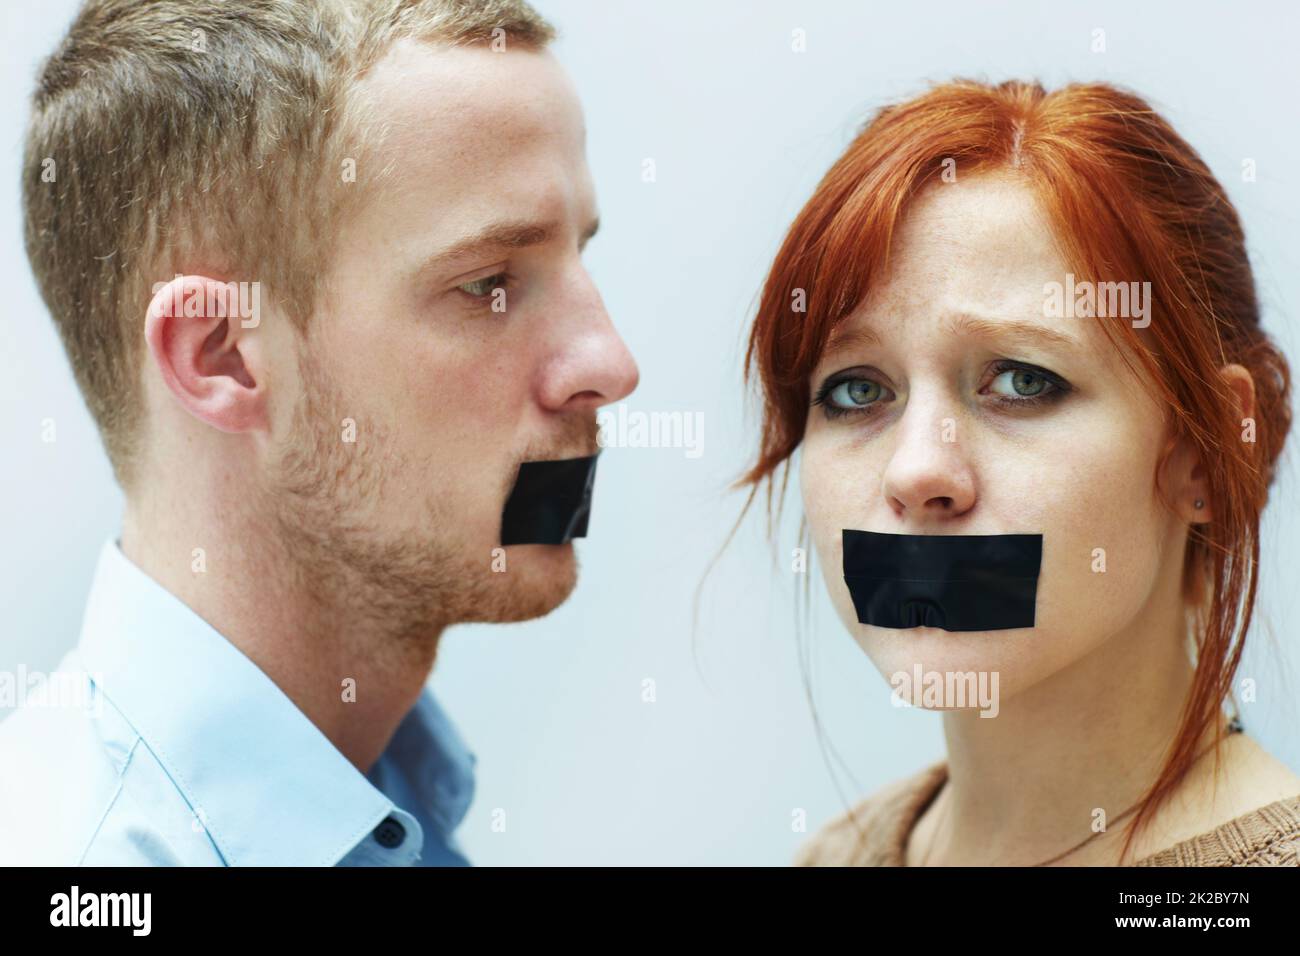 Theyve been silenced. A young couple looking sad with tape over their mouths. Stock Photo